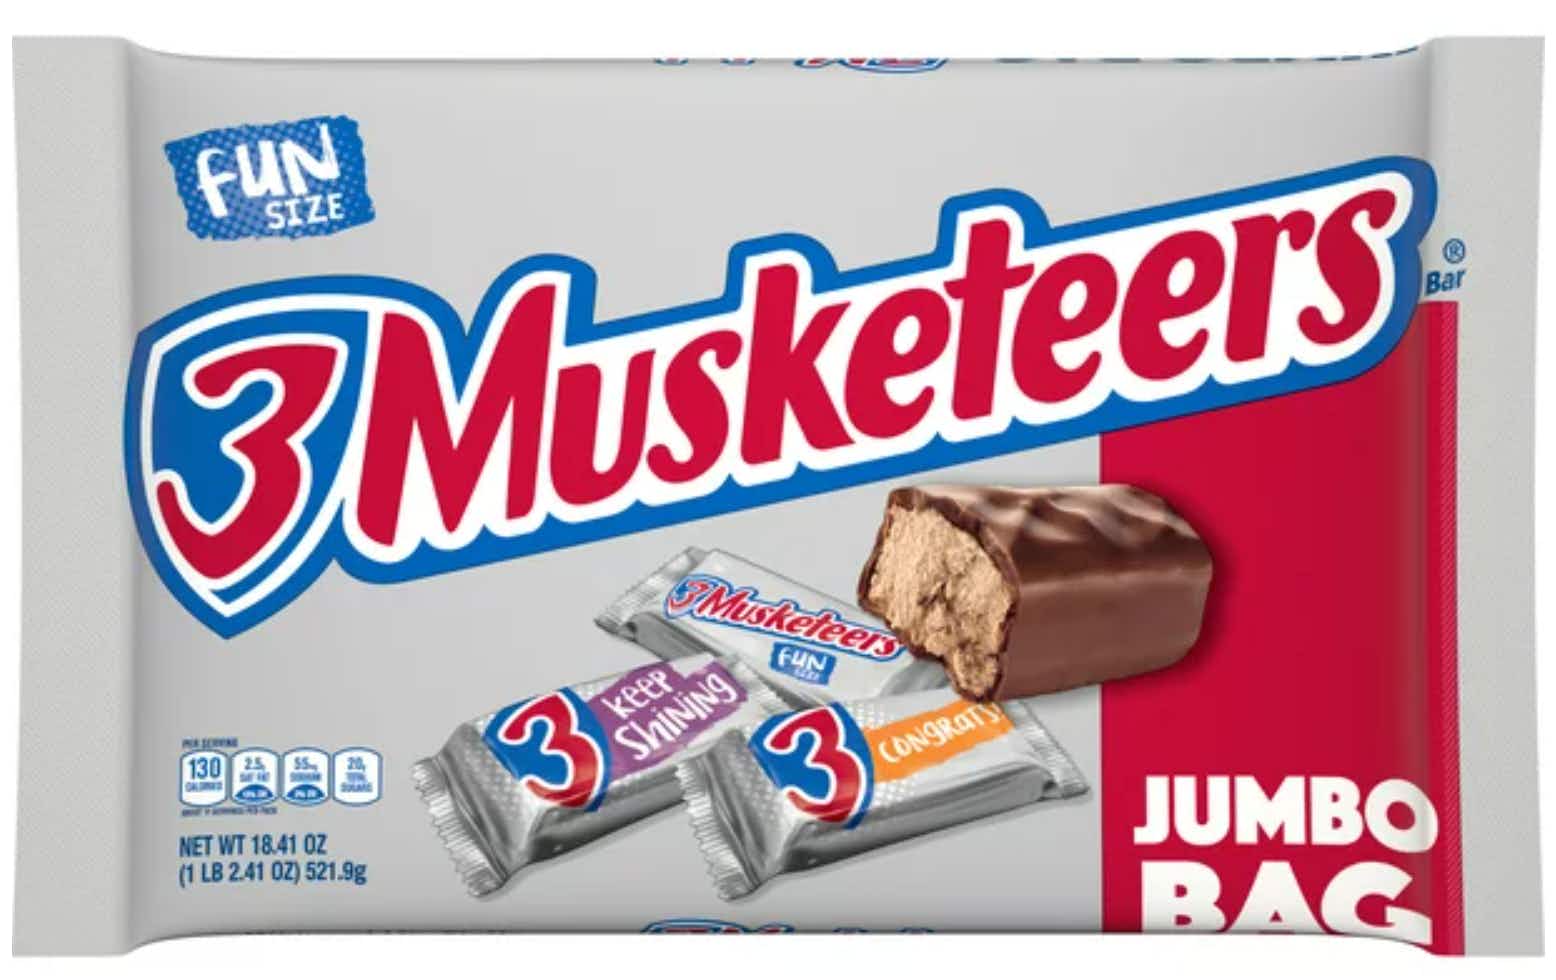 3 Musketeers fun size candy bar bag.